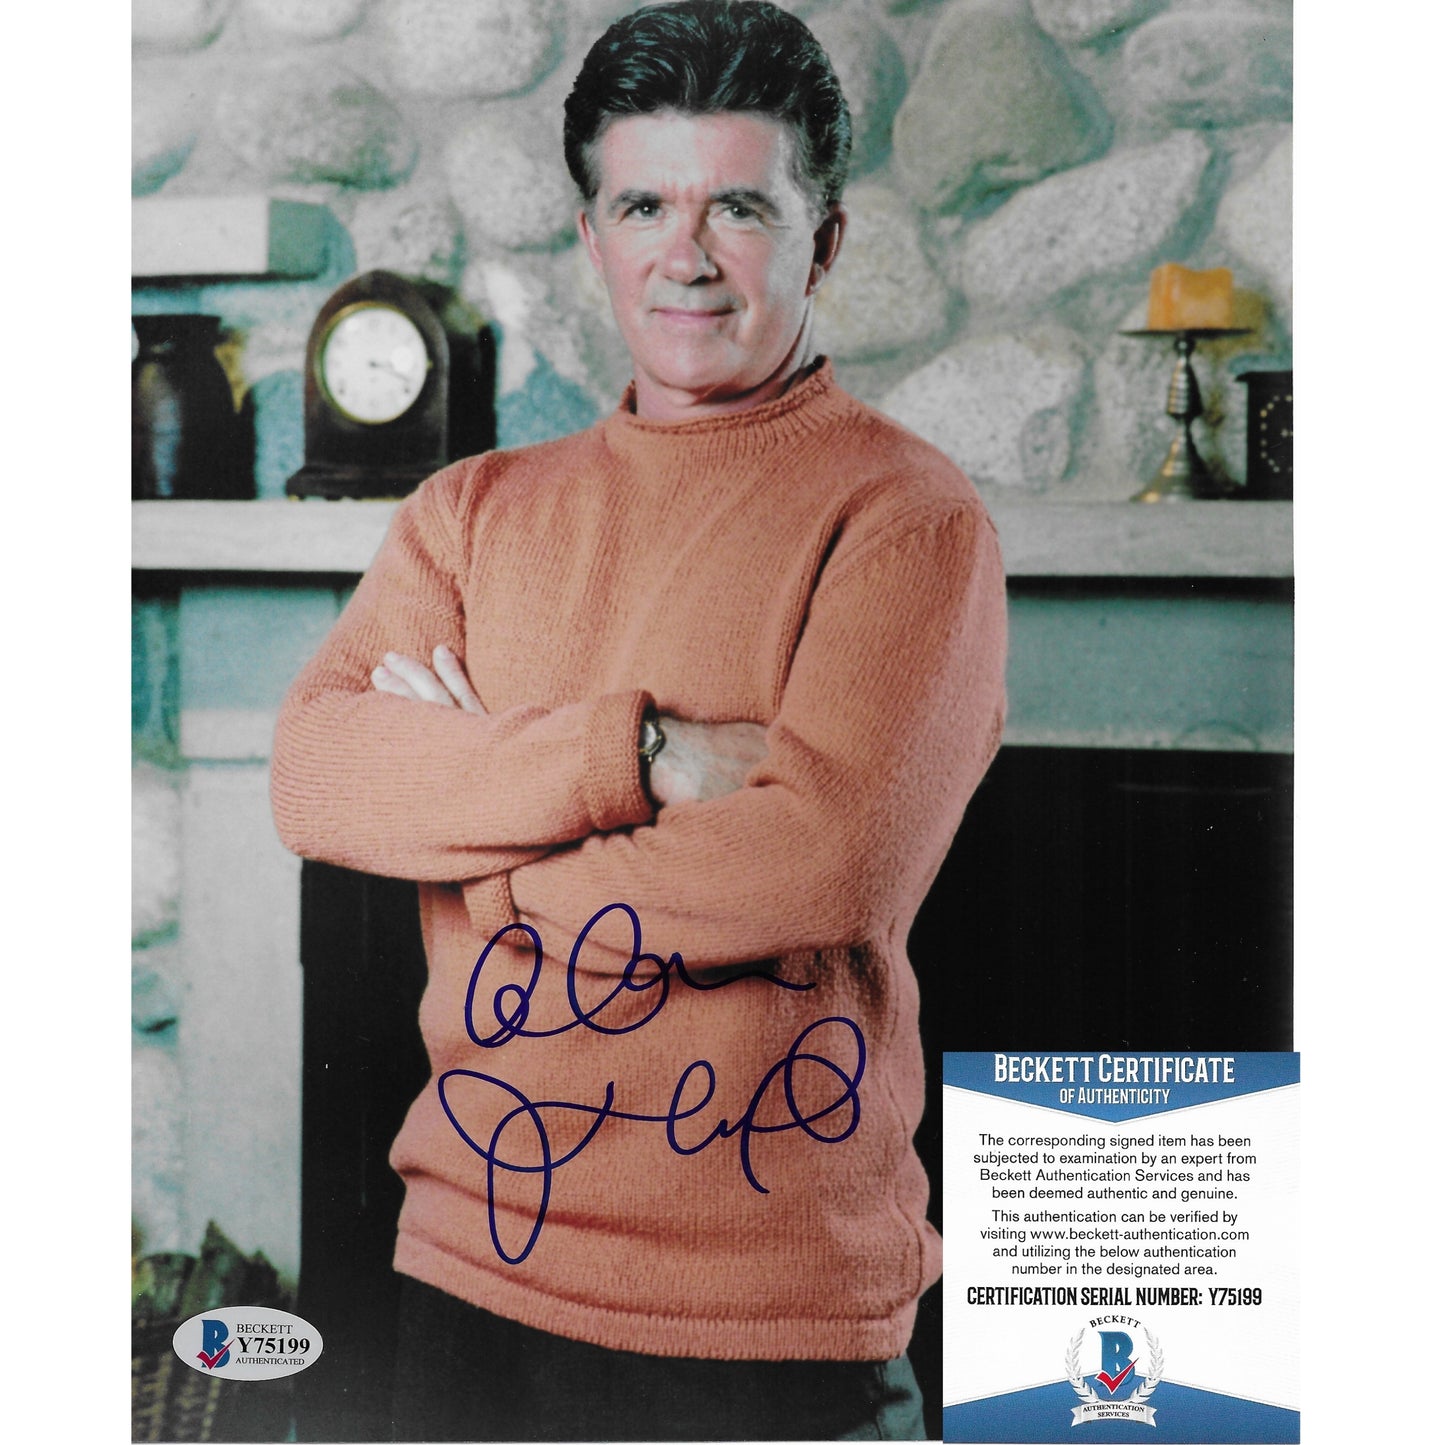 Hollywood- Autographed- Alan Thicke Signed Growing Pains 8x10 Photo Beckett BAS Authentication 101